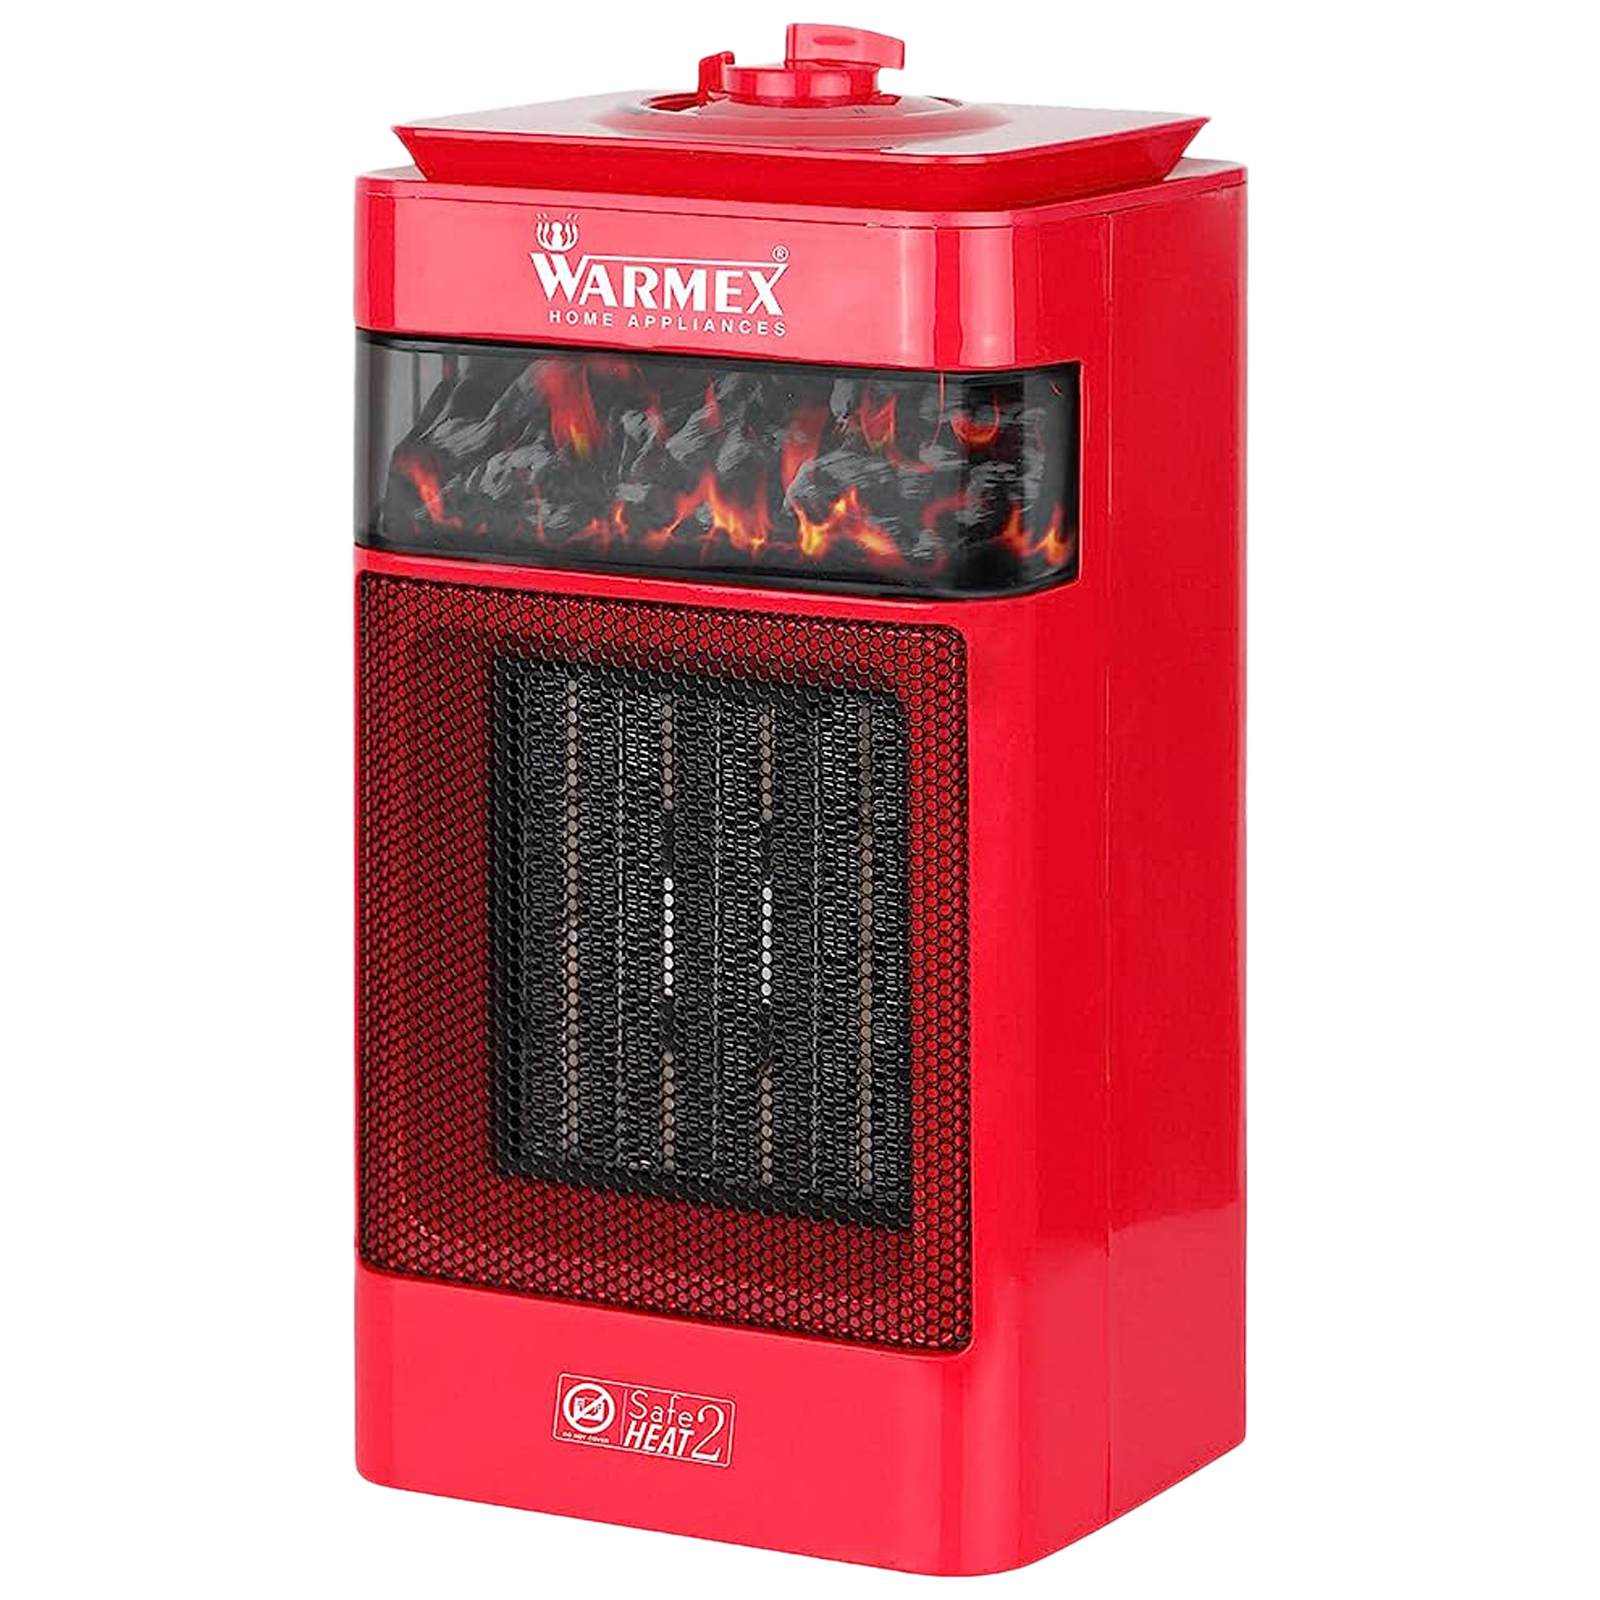 WARMEX Bonfire Plus 1500 Watts PTC Ceramic Fan Room Heater (Tip Over Safety Switch, Red)